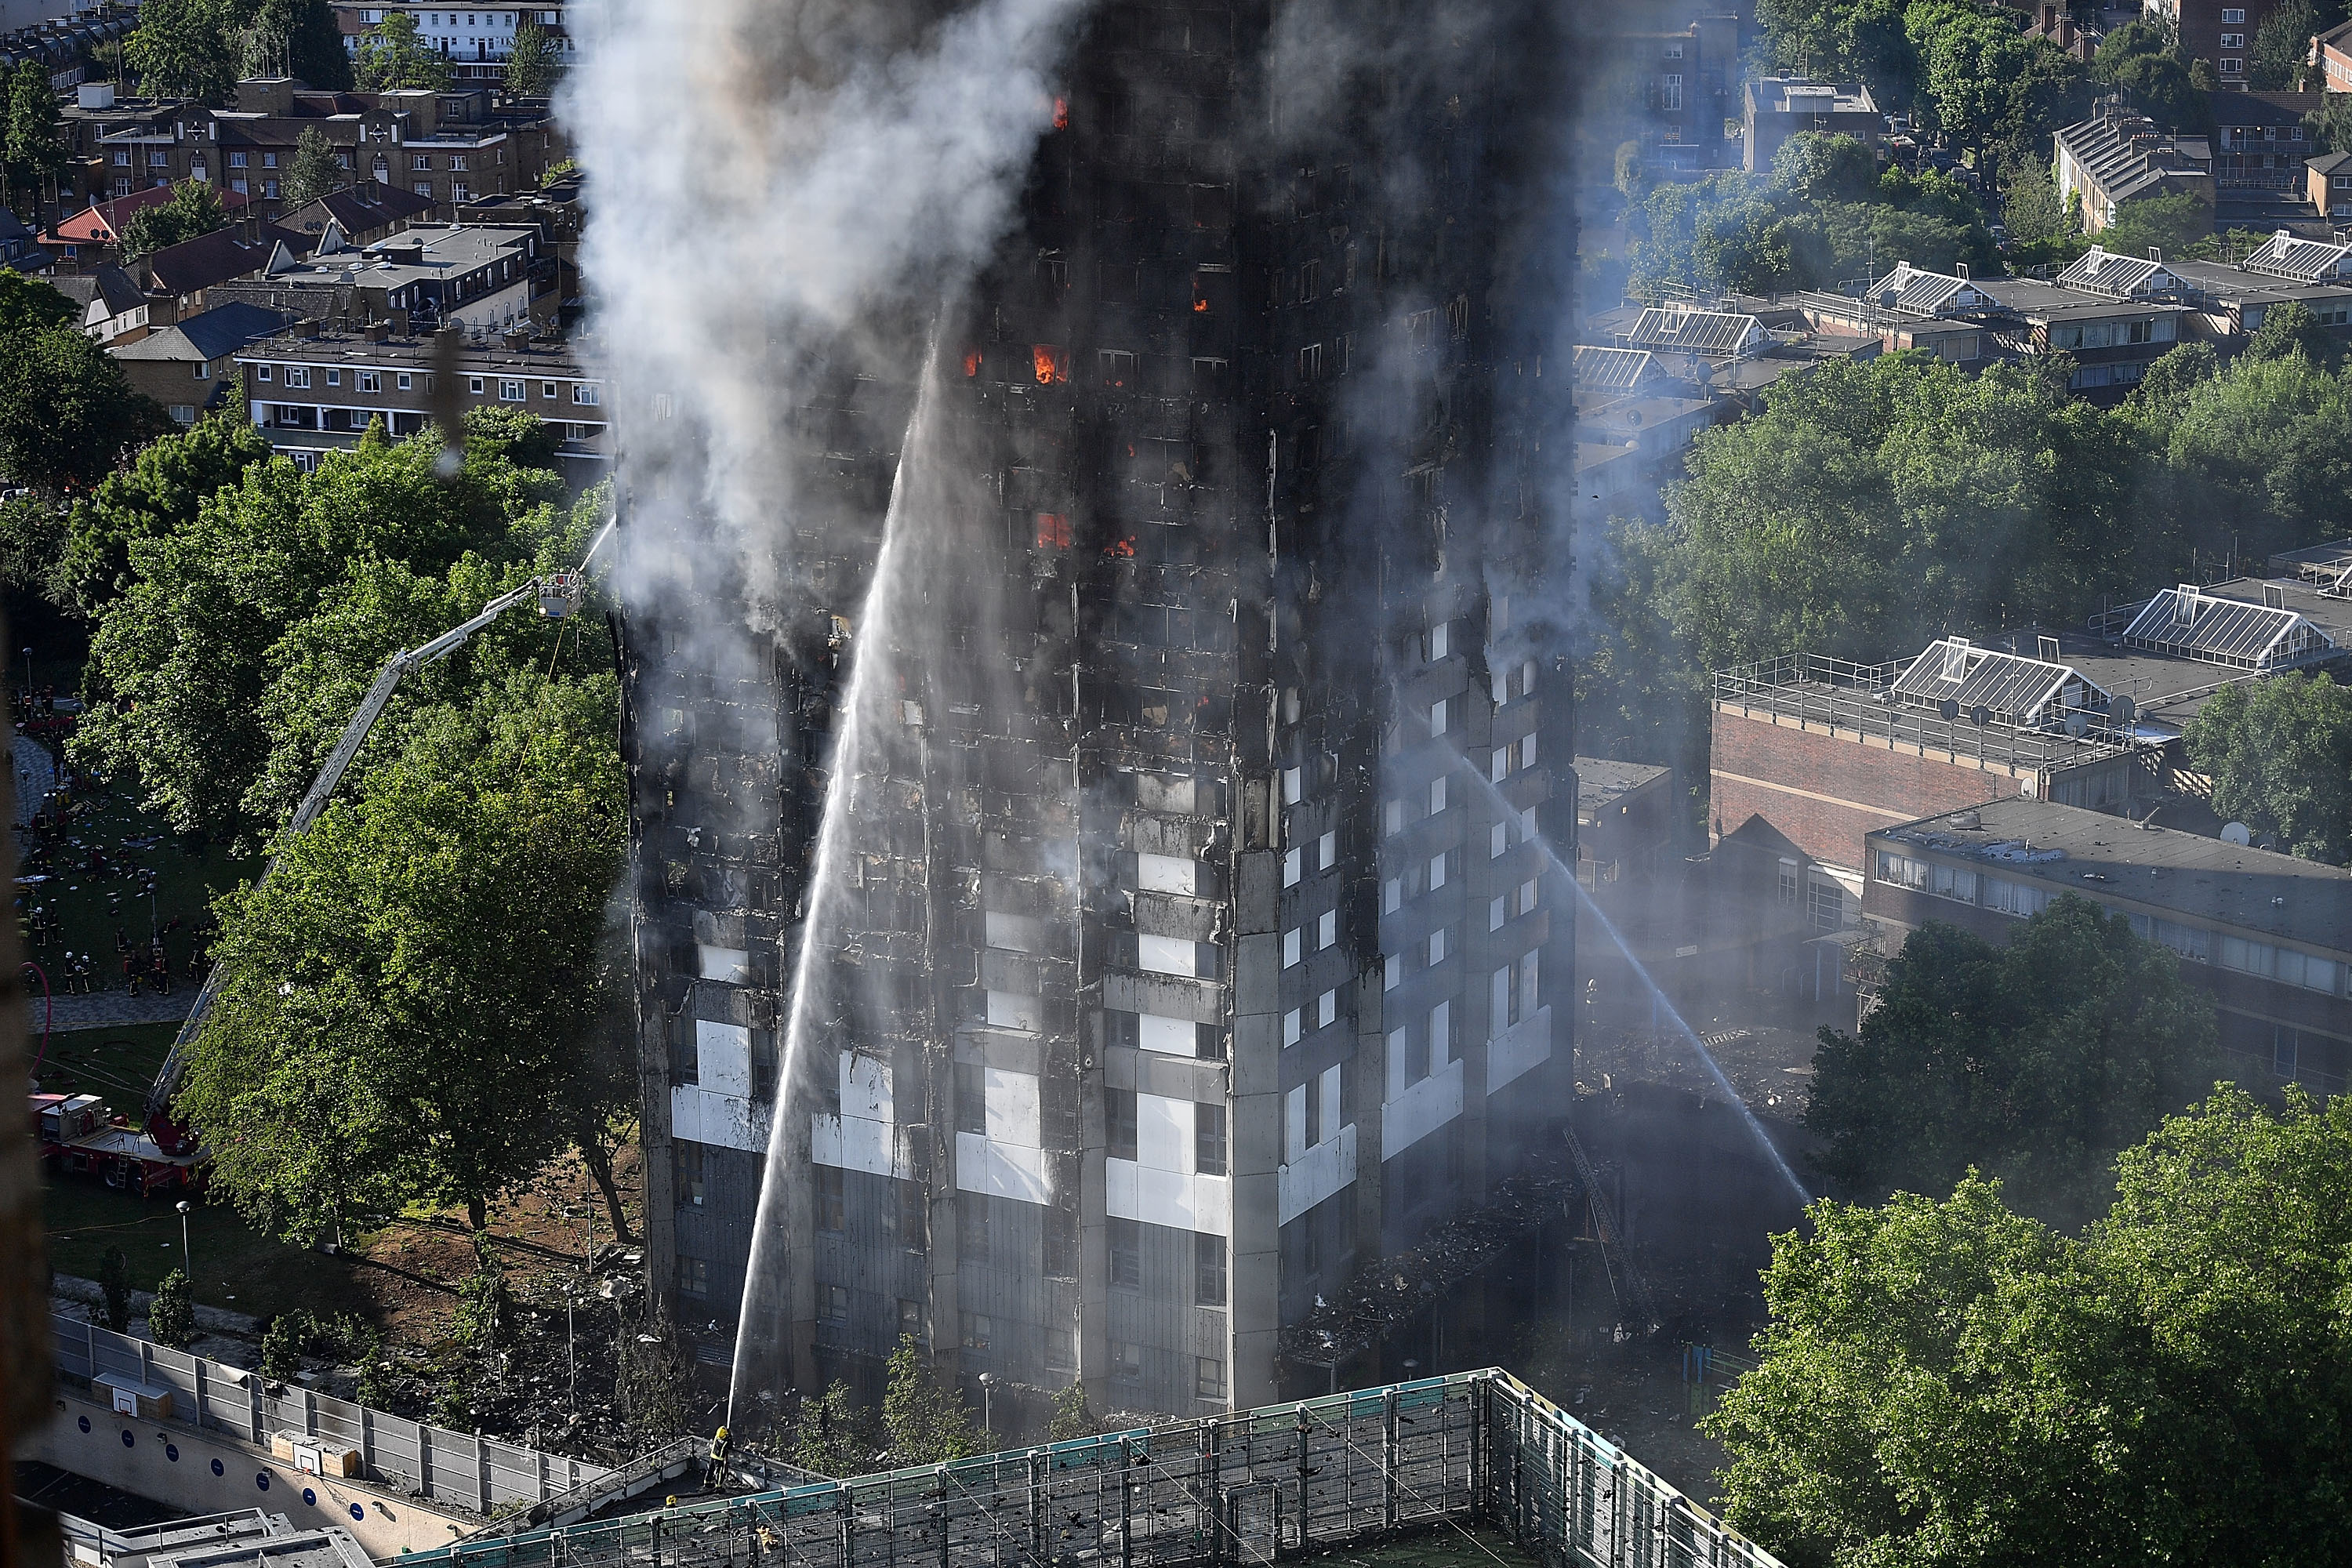 Fire fighters tackle the building after a huge fire engulfed the 24-storey Grenfell Tower in Latimer Road, West London.